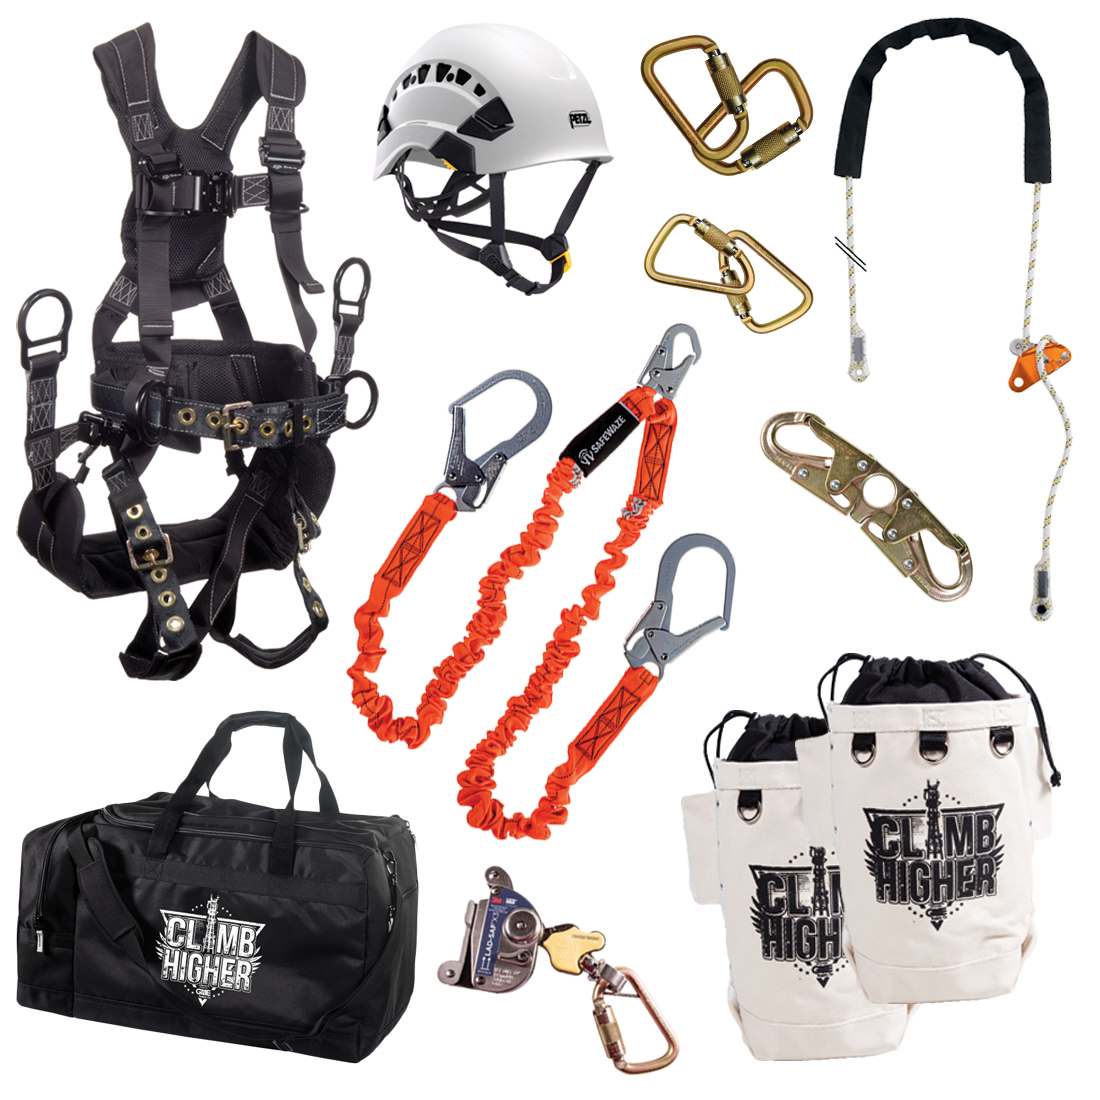 GME Supply 90019 Peregrine Tower Climbing Kit from GME Supply